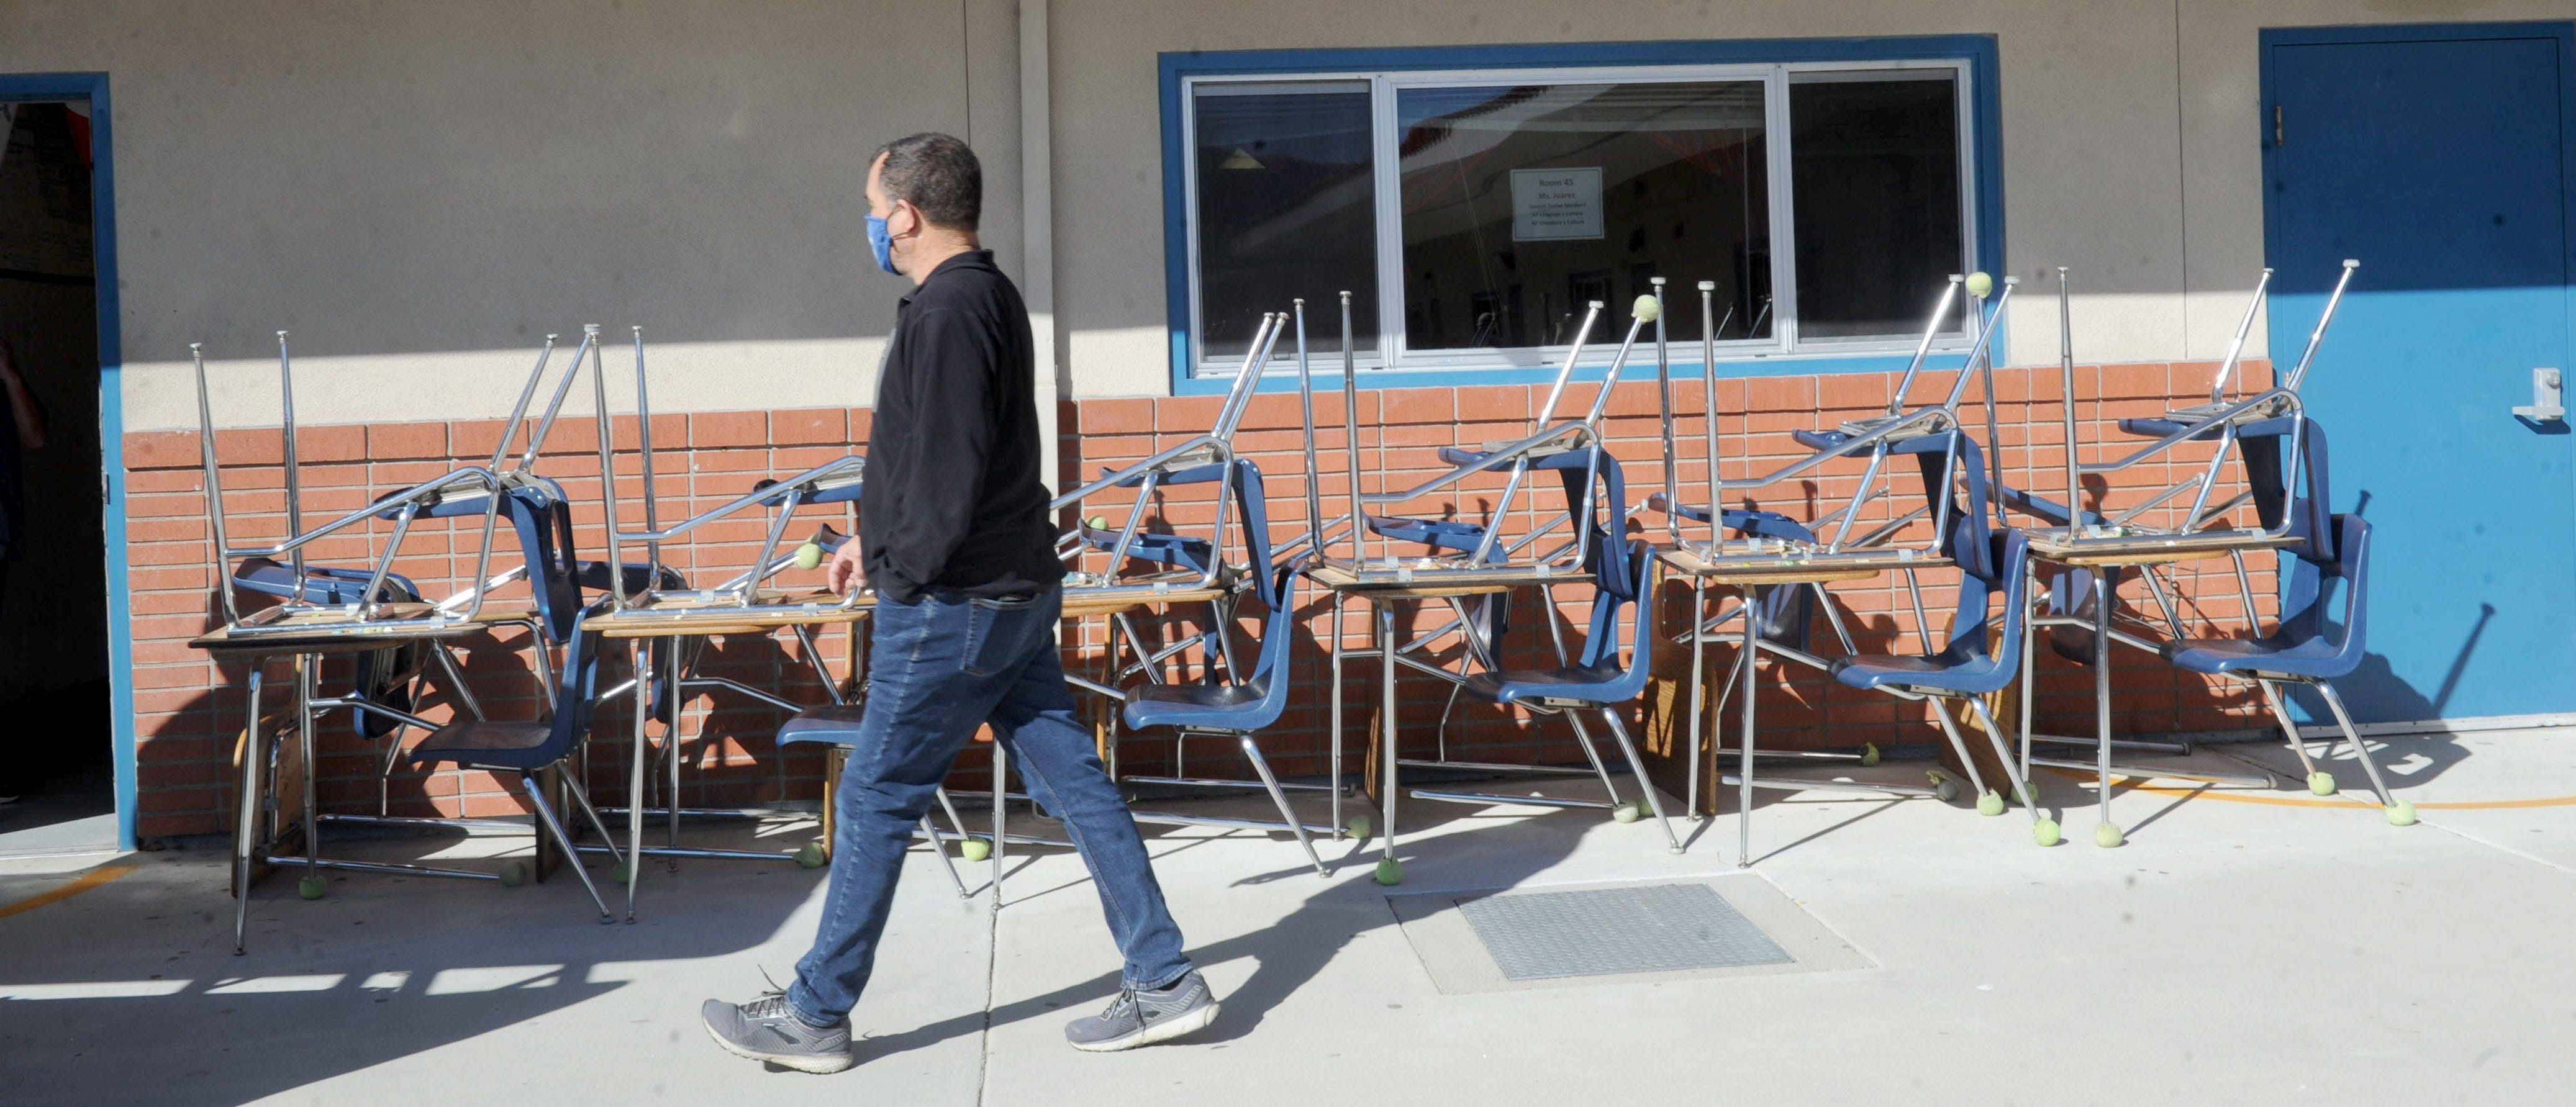 Fillmore High School Principal John Wilber walks across the closed campus where some desk sit outside on Friday, Feb. 05, 2021. The California high school has been closed since March 2020.